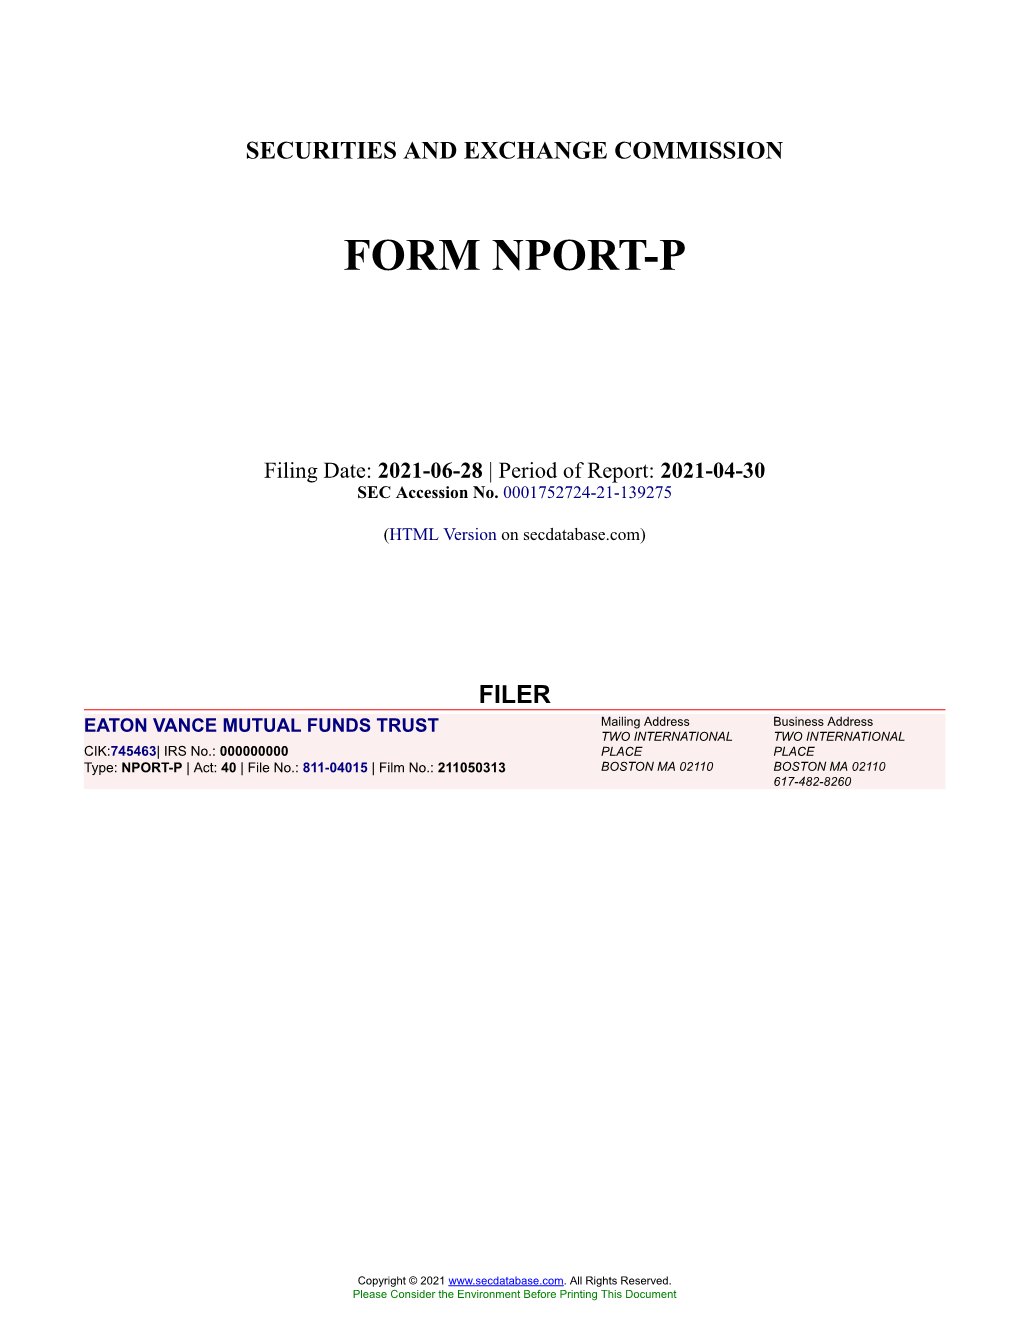 EATON VANCE MUTUAL FUNDS TRUST Form